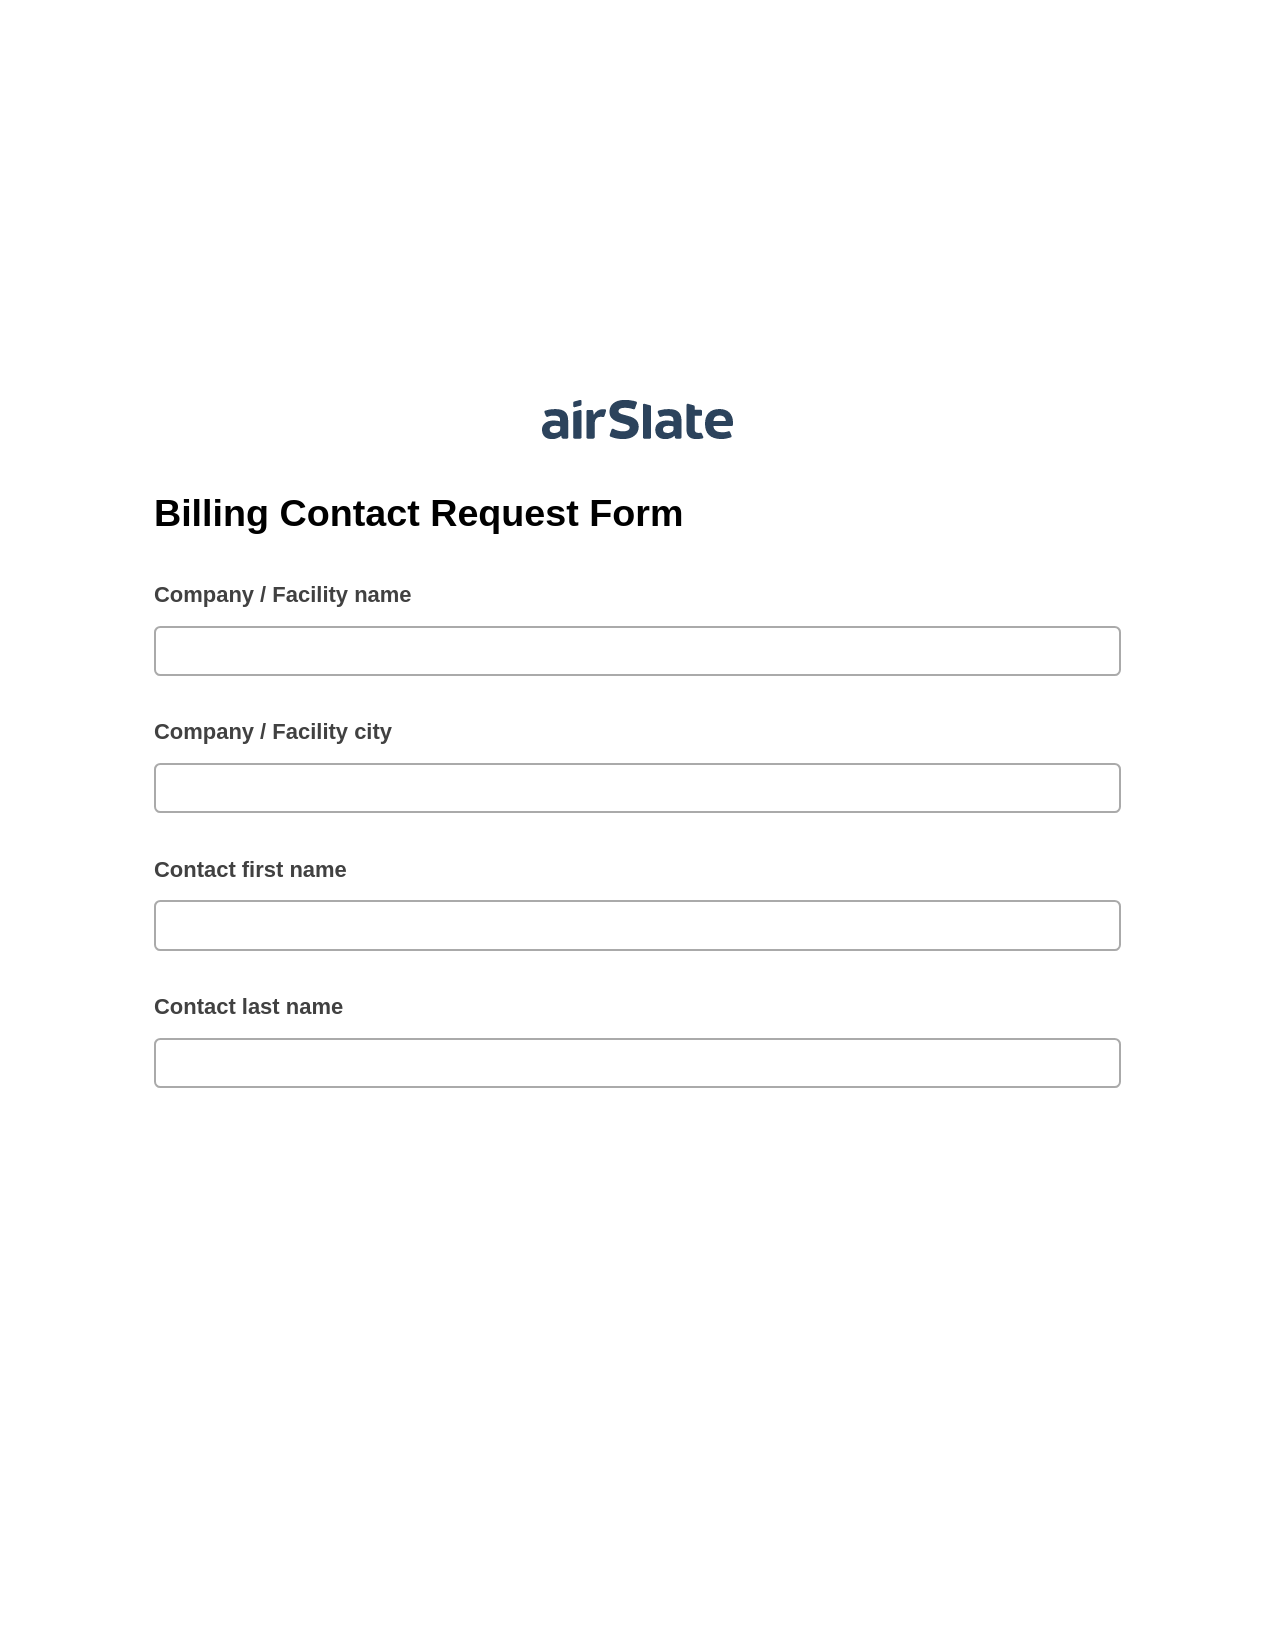 Multirole Billing Contact Request Form Pre-fill Document Bot, Set Signature Type Bot, Export to Smartsheet